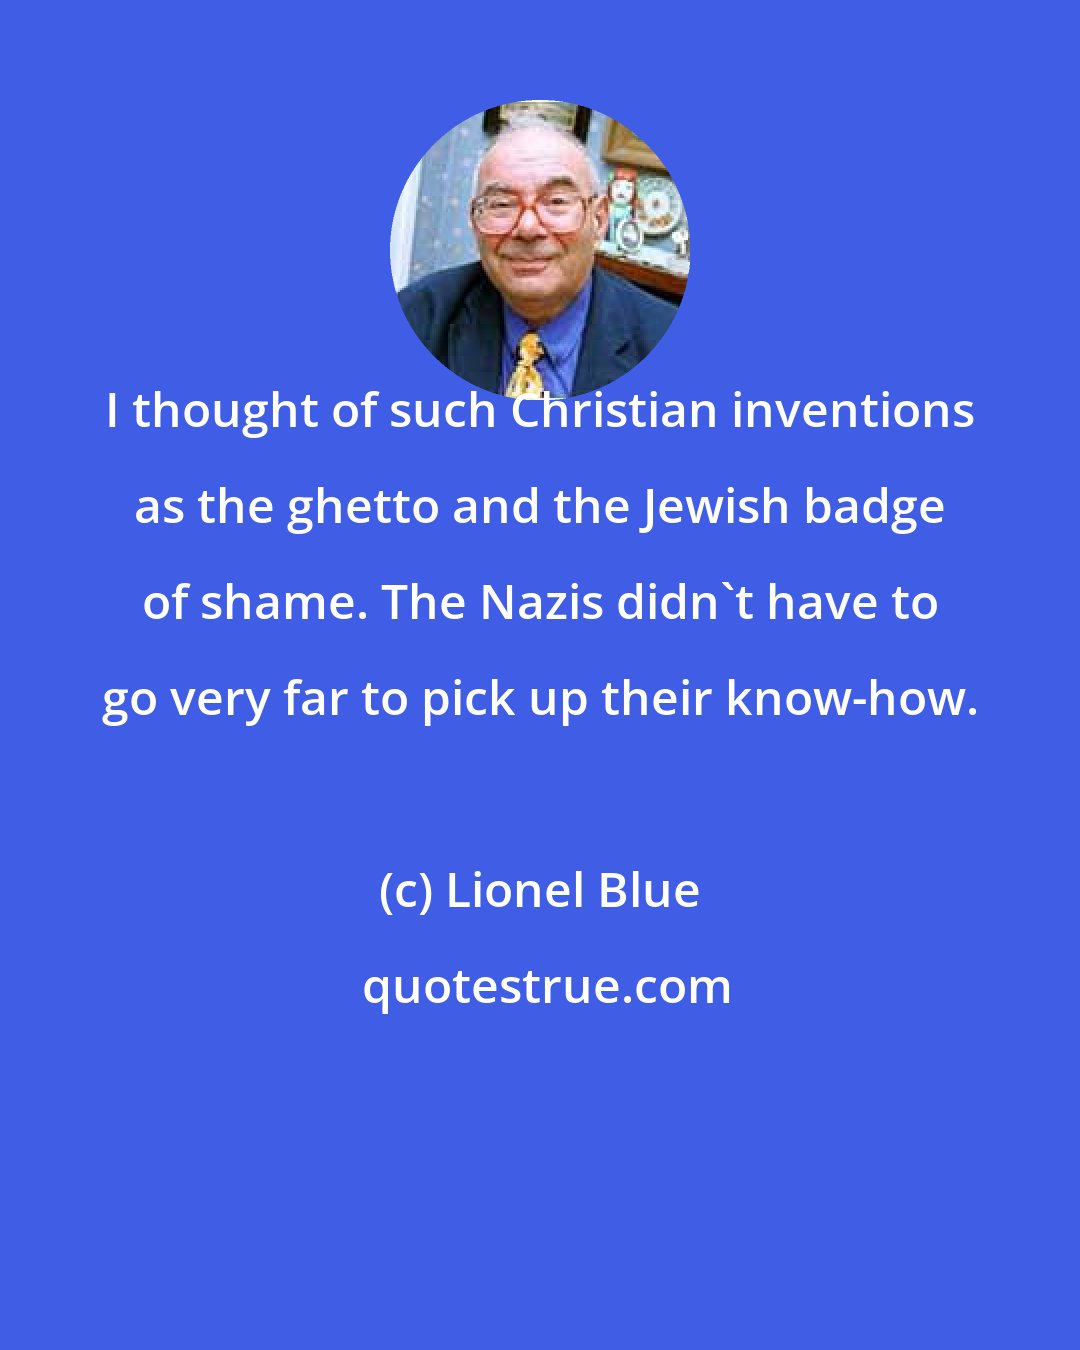 Lionel Blue: I thought of such Christian inventions as the ghetto and the Jewish badge of shame. The Nazis didn't have to go very far to pick up their know-how.